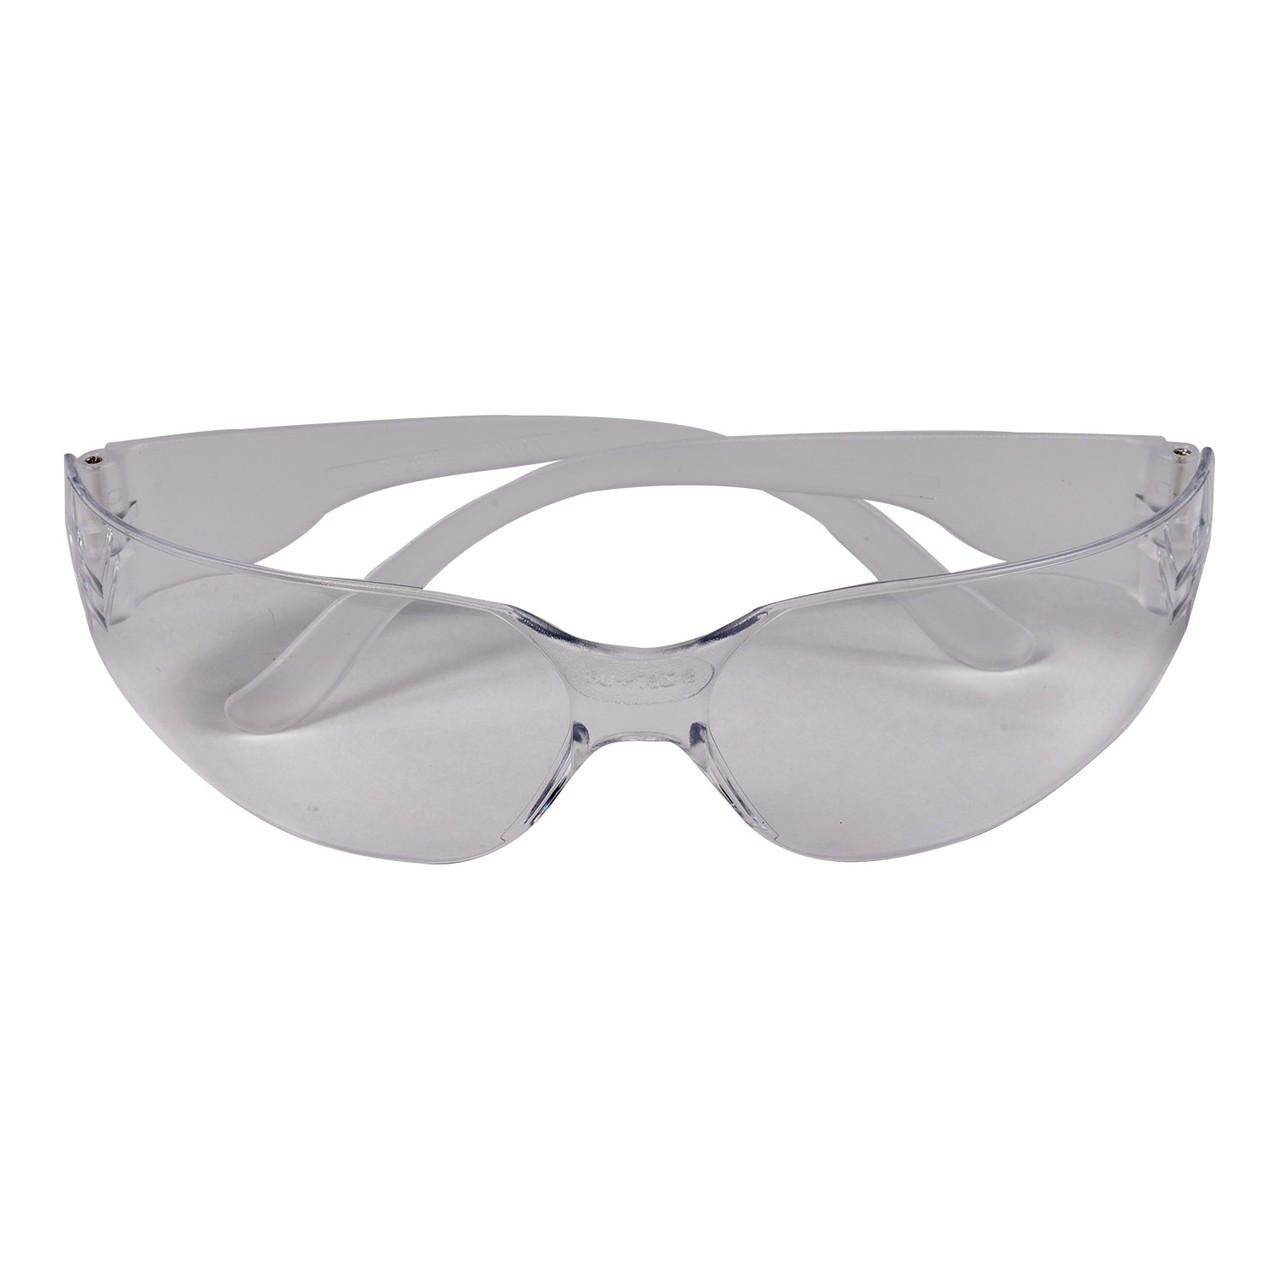 https://cdn11.bigcommerce.com/s-vxsr4nt/images/stencil/1280x1280/products/59326/37989/SGCORECLEARH_CORE_Safety_Glasses_Scratch_and_Impact_Resistant_UV_Protective_Clear_Hard_Coat_Eyewear__88281.1691768790.jpg?c=2